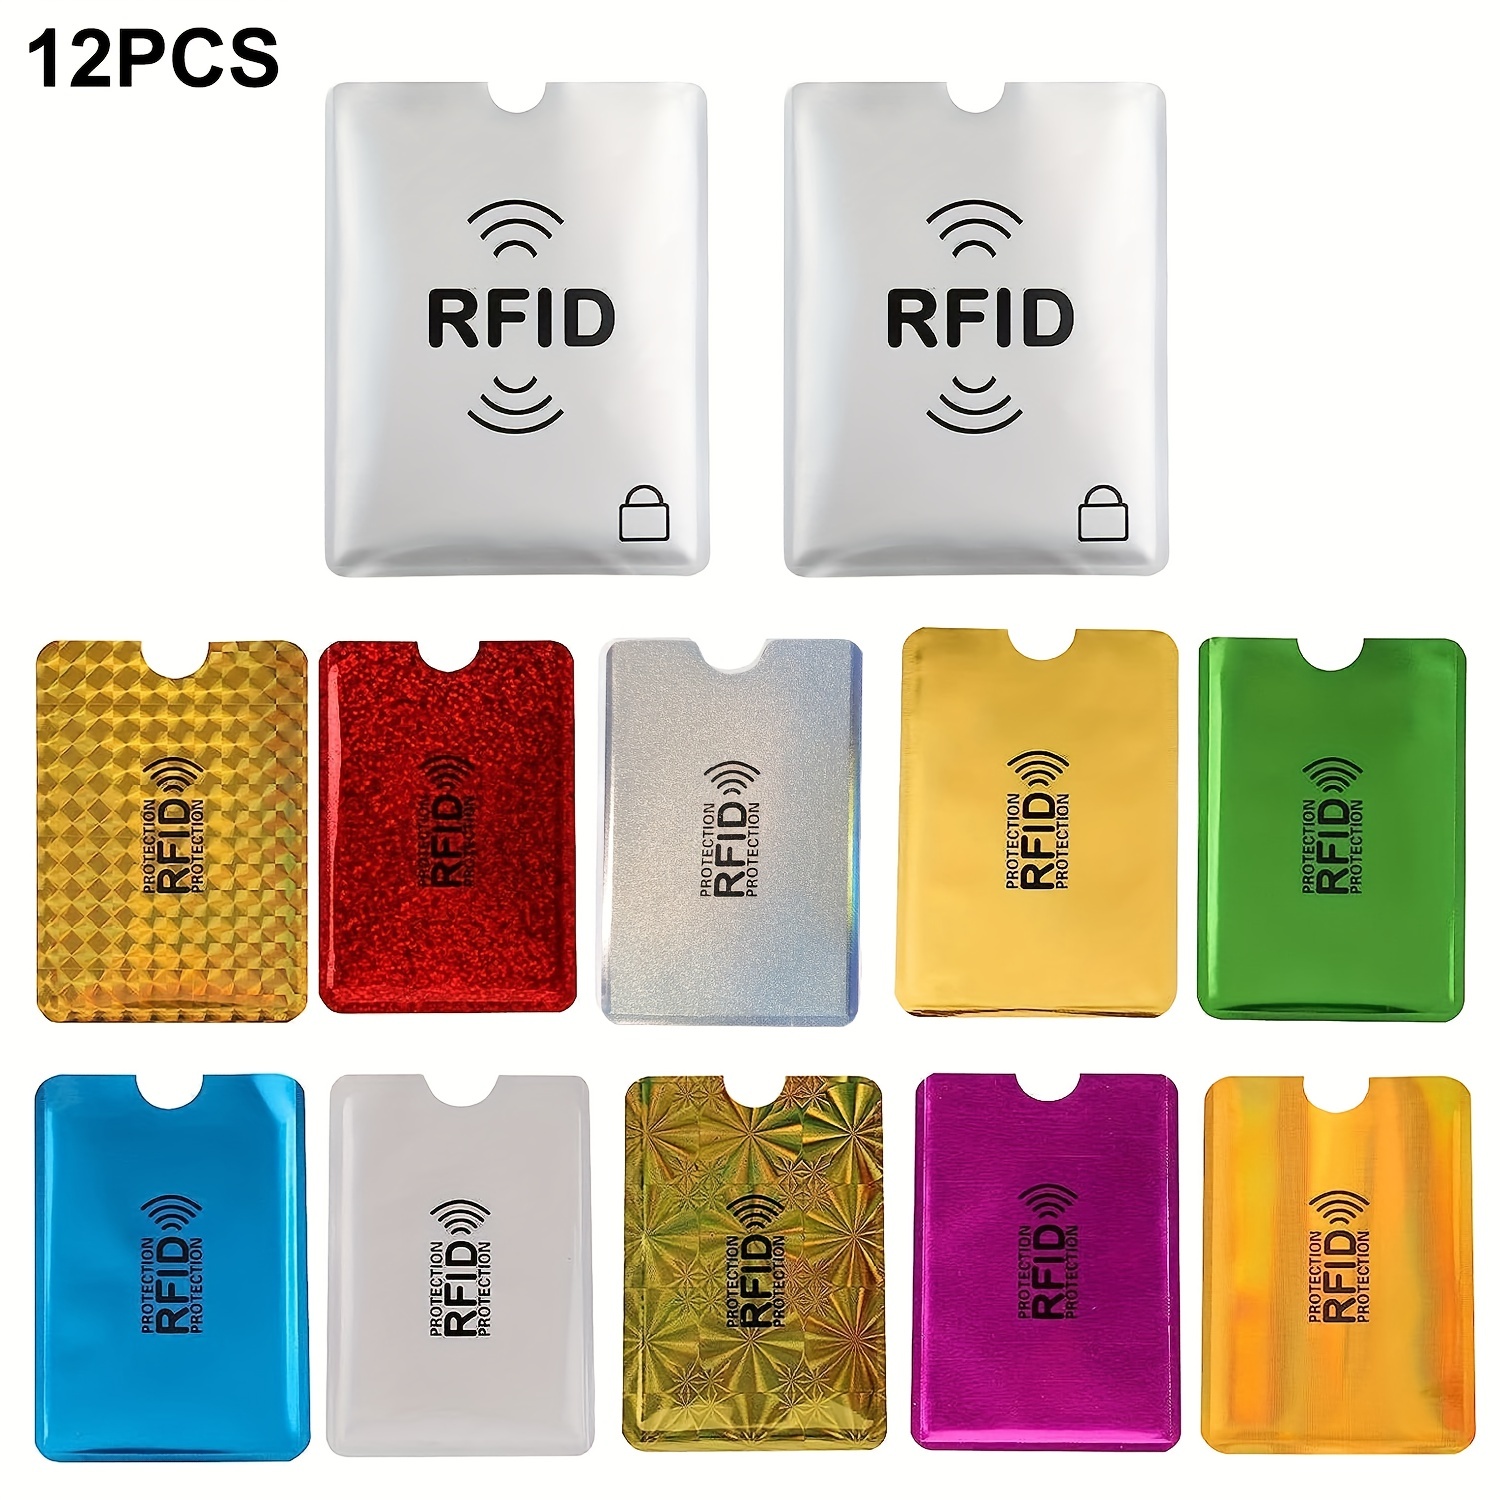 Difference Between RFID Blocking Cards And Sleeves?